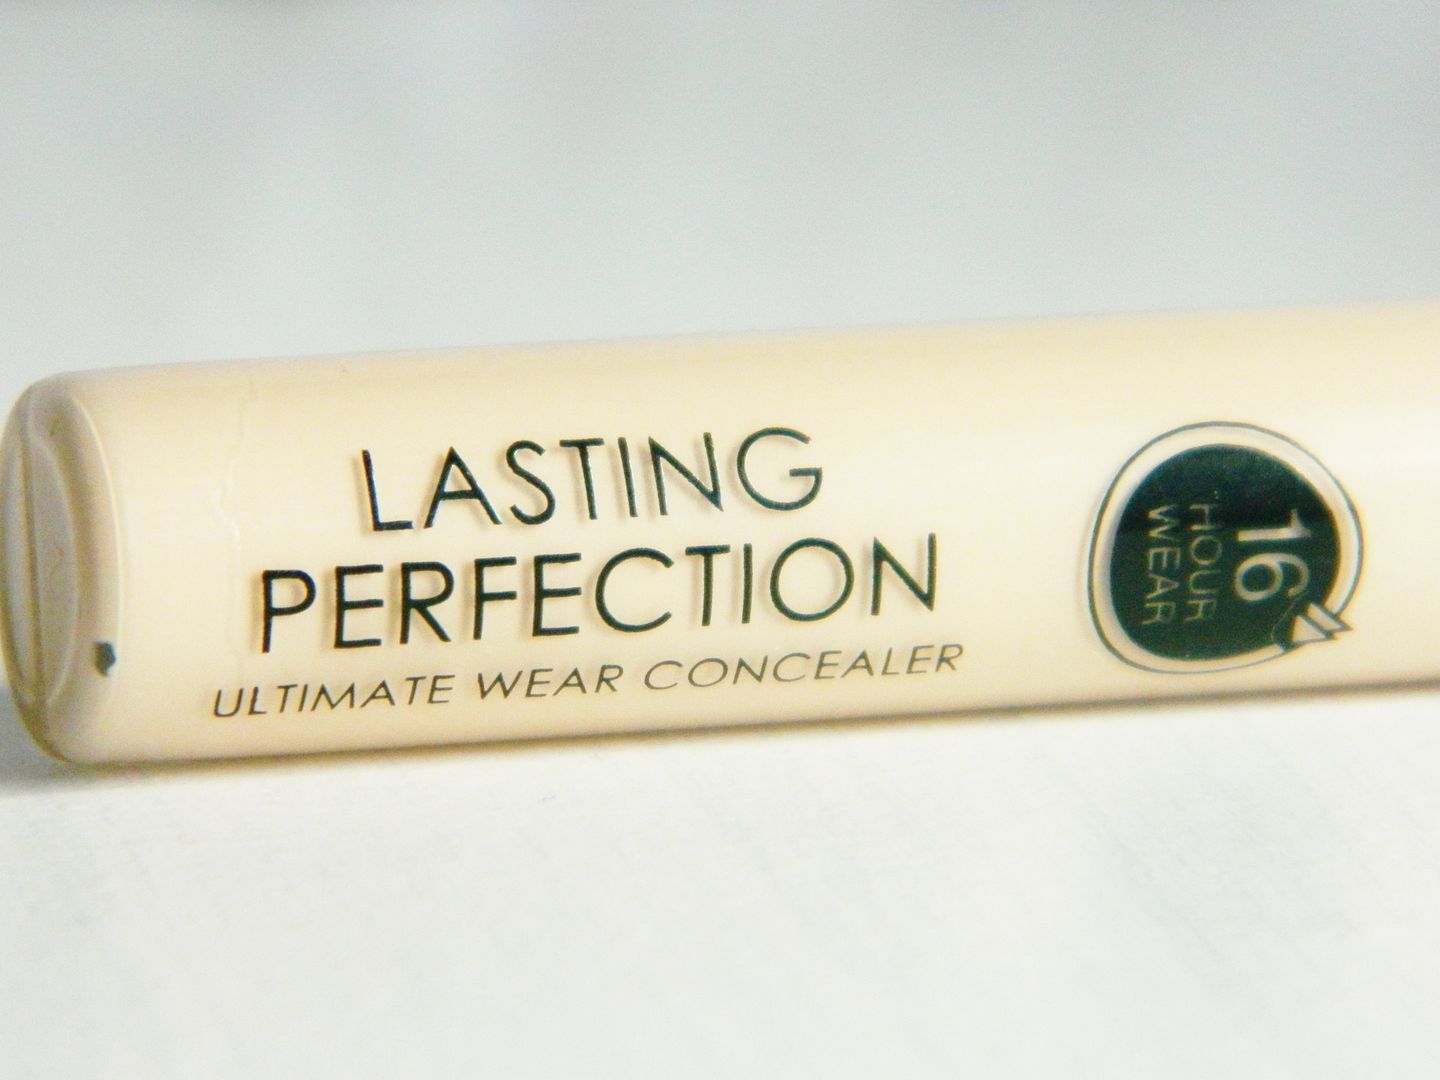 Collection Lasting Perfection Ultimate Wear Concealer Fair 1 Review Belle-amie UK Beauty Fashion Lifestyle Blog